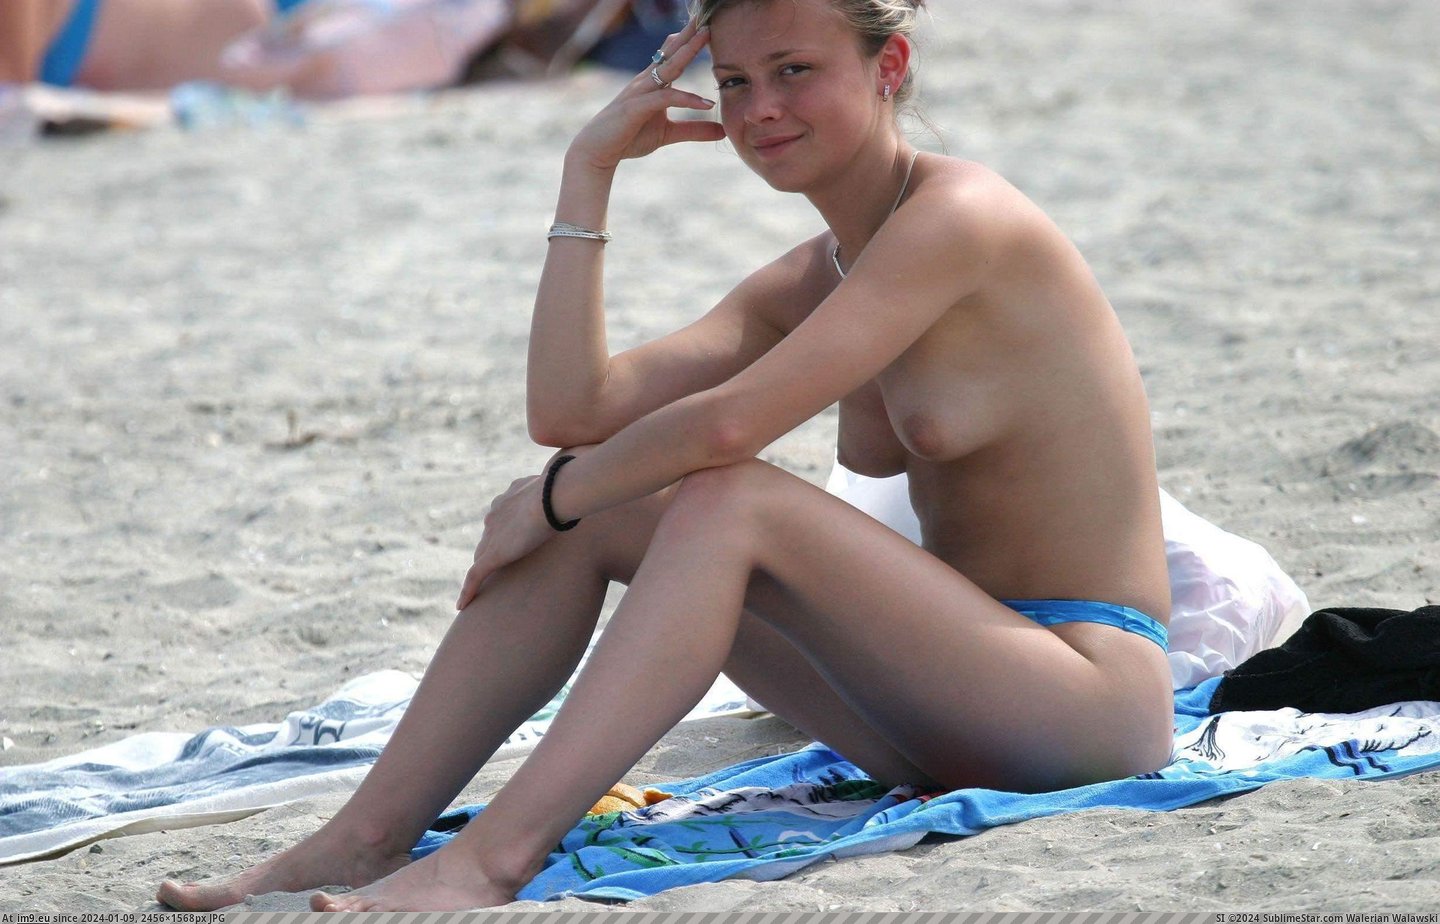 #Teens  #Topless best-of-topless-teens-131-3 Pic. (Obraz z album Strictly Topless))